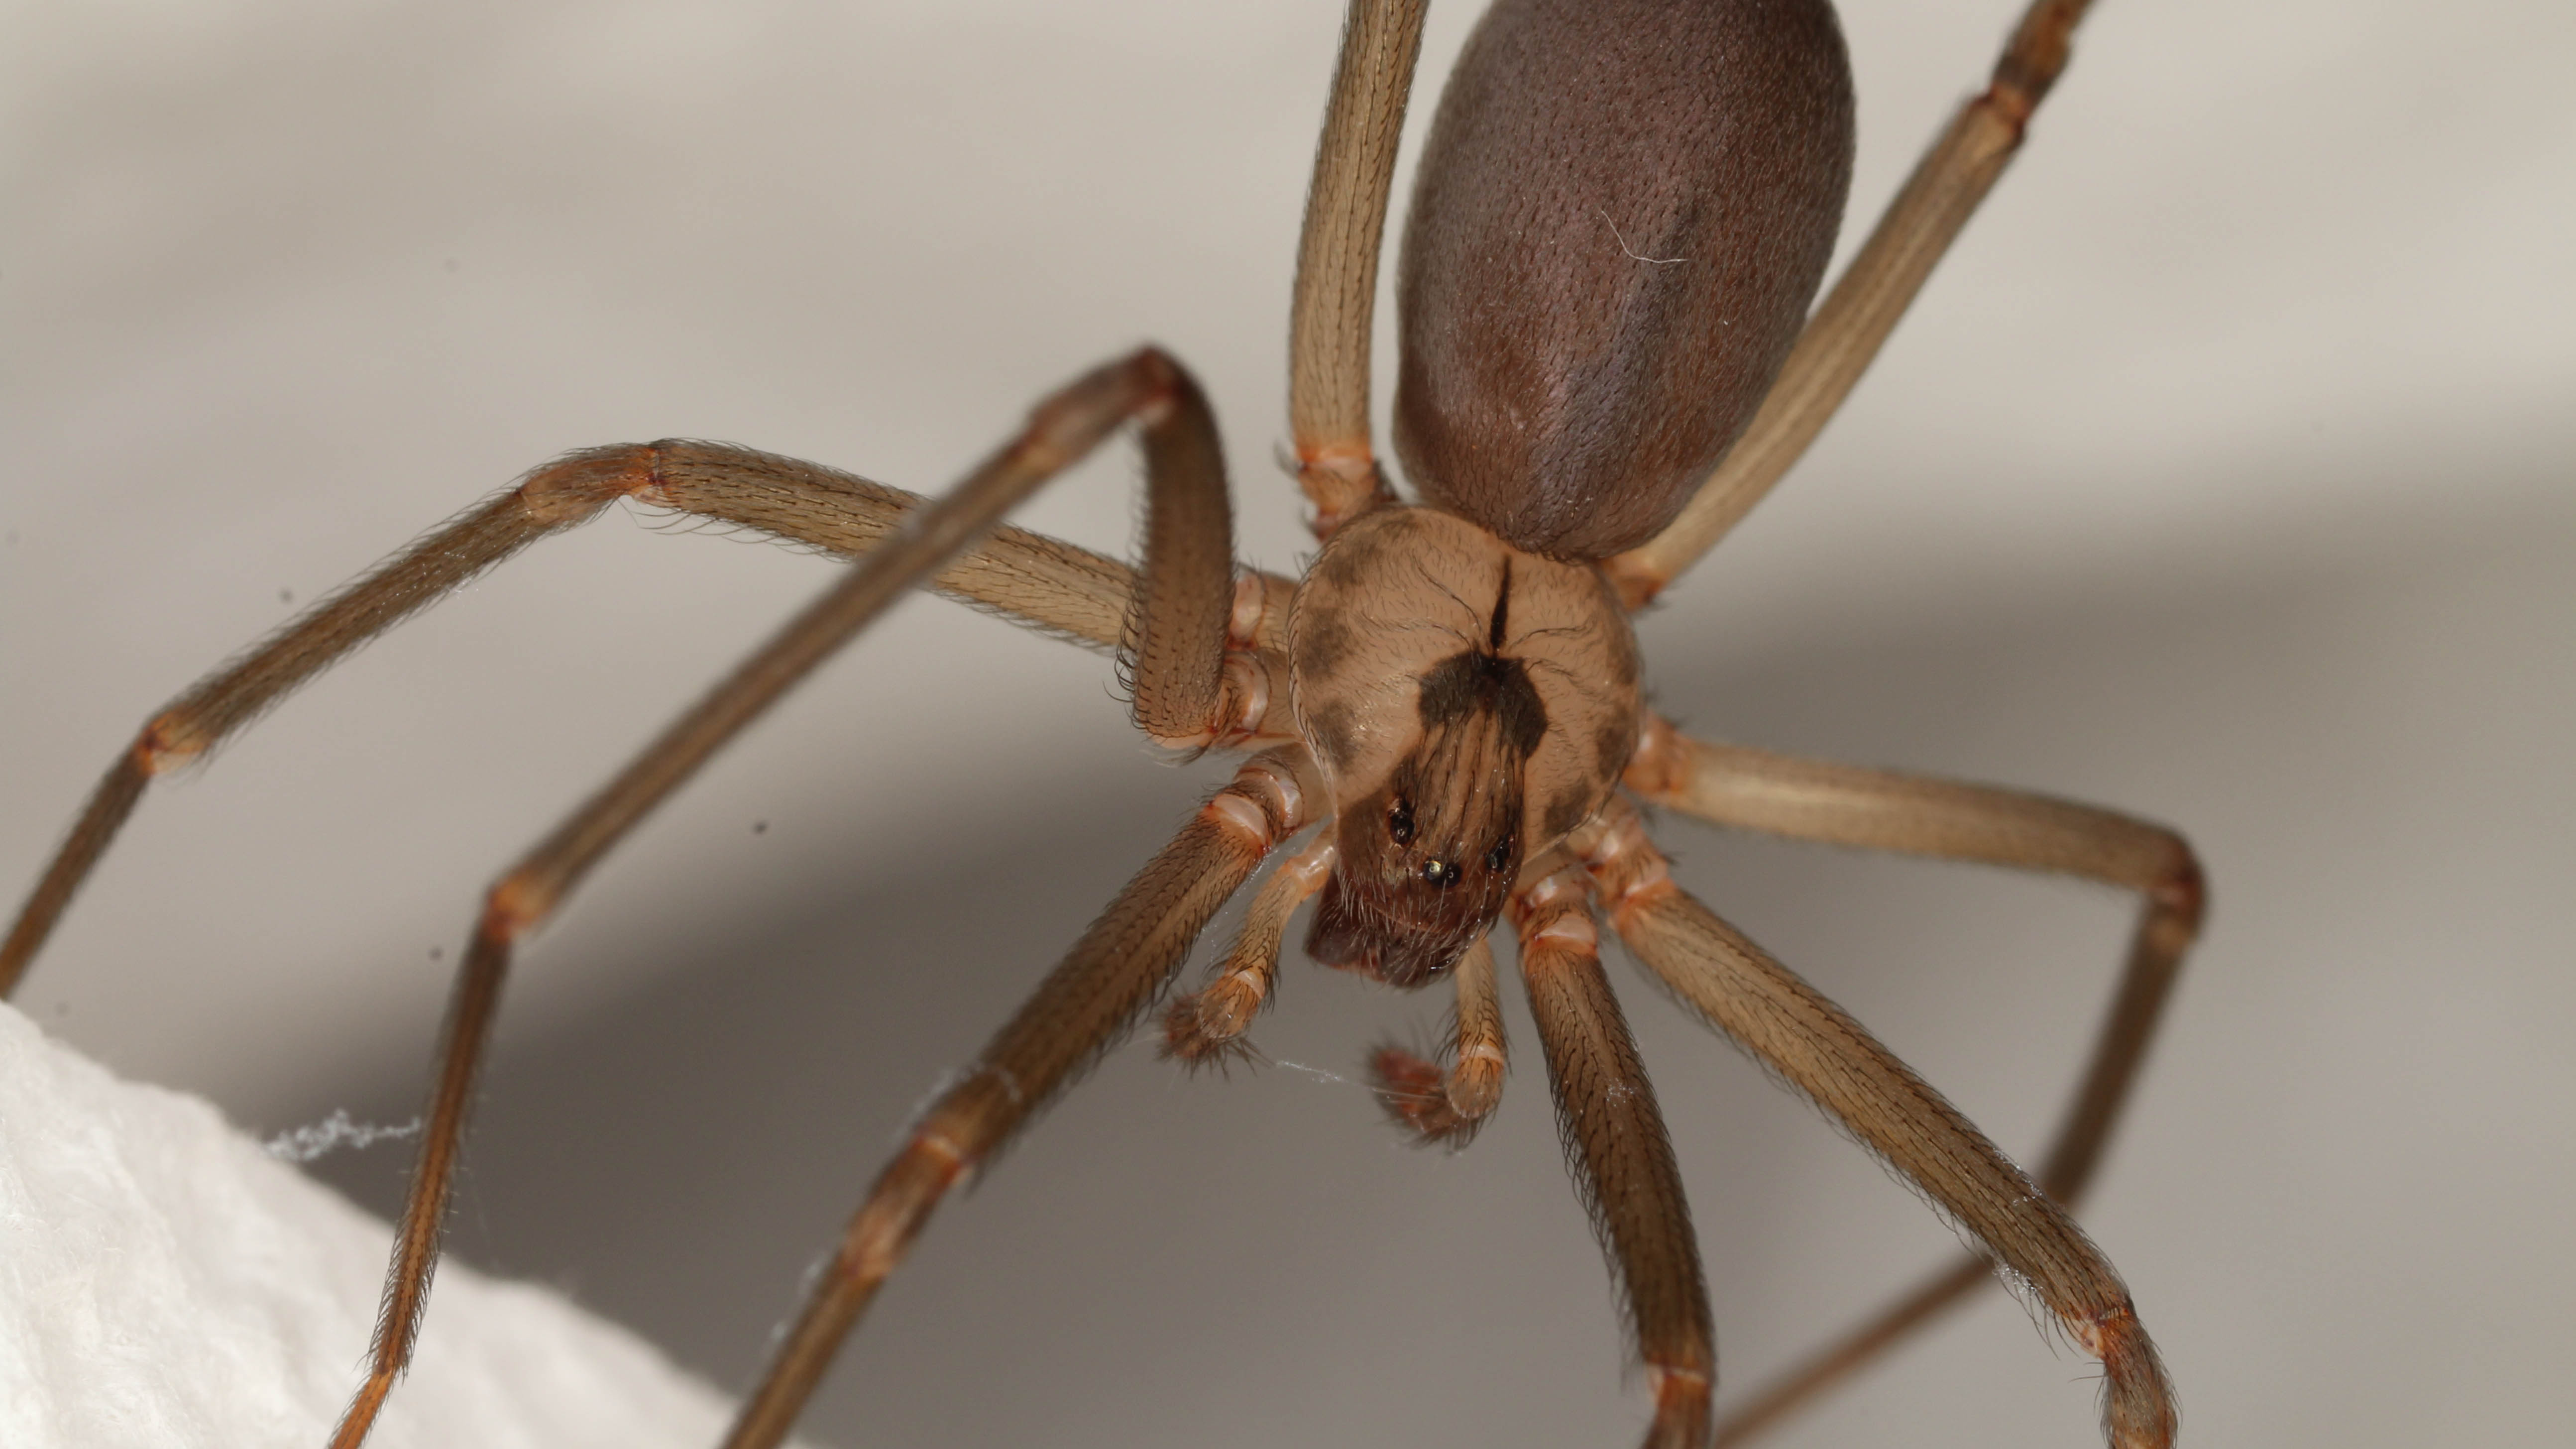 A close up of a Brown Recluse spider